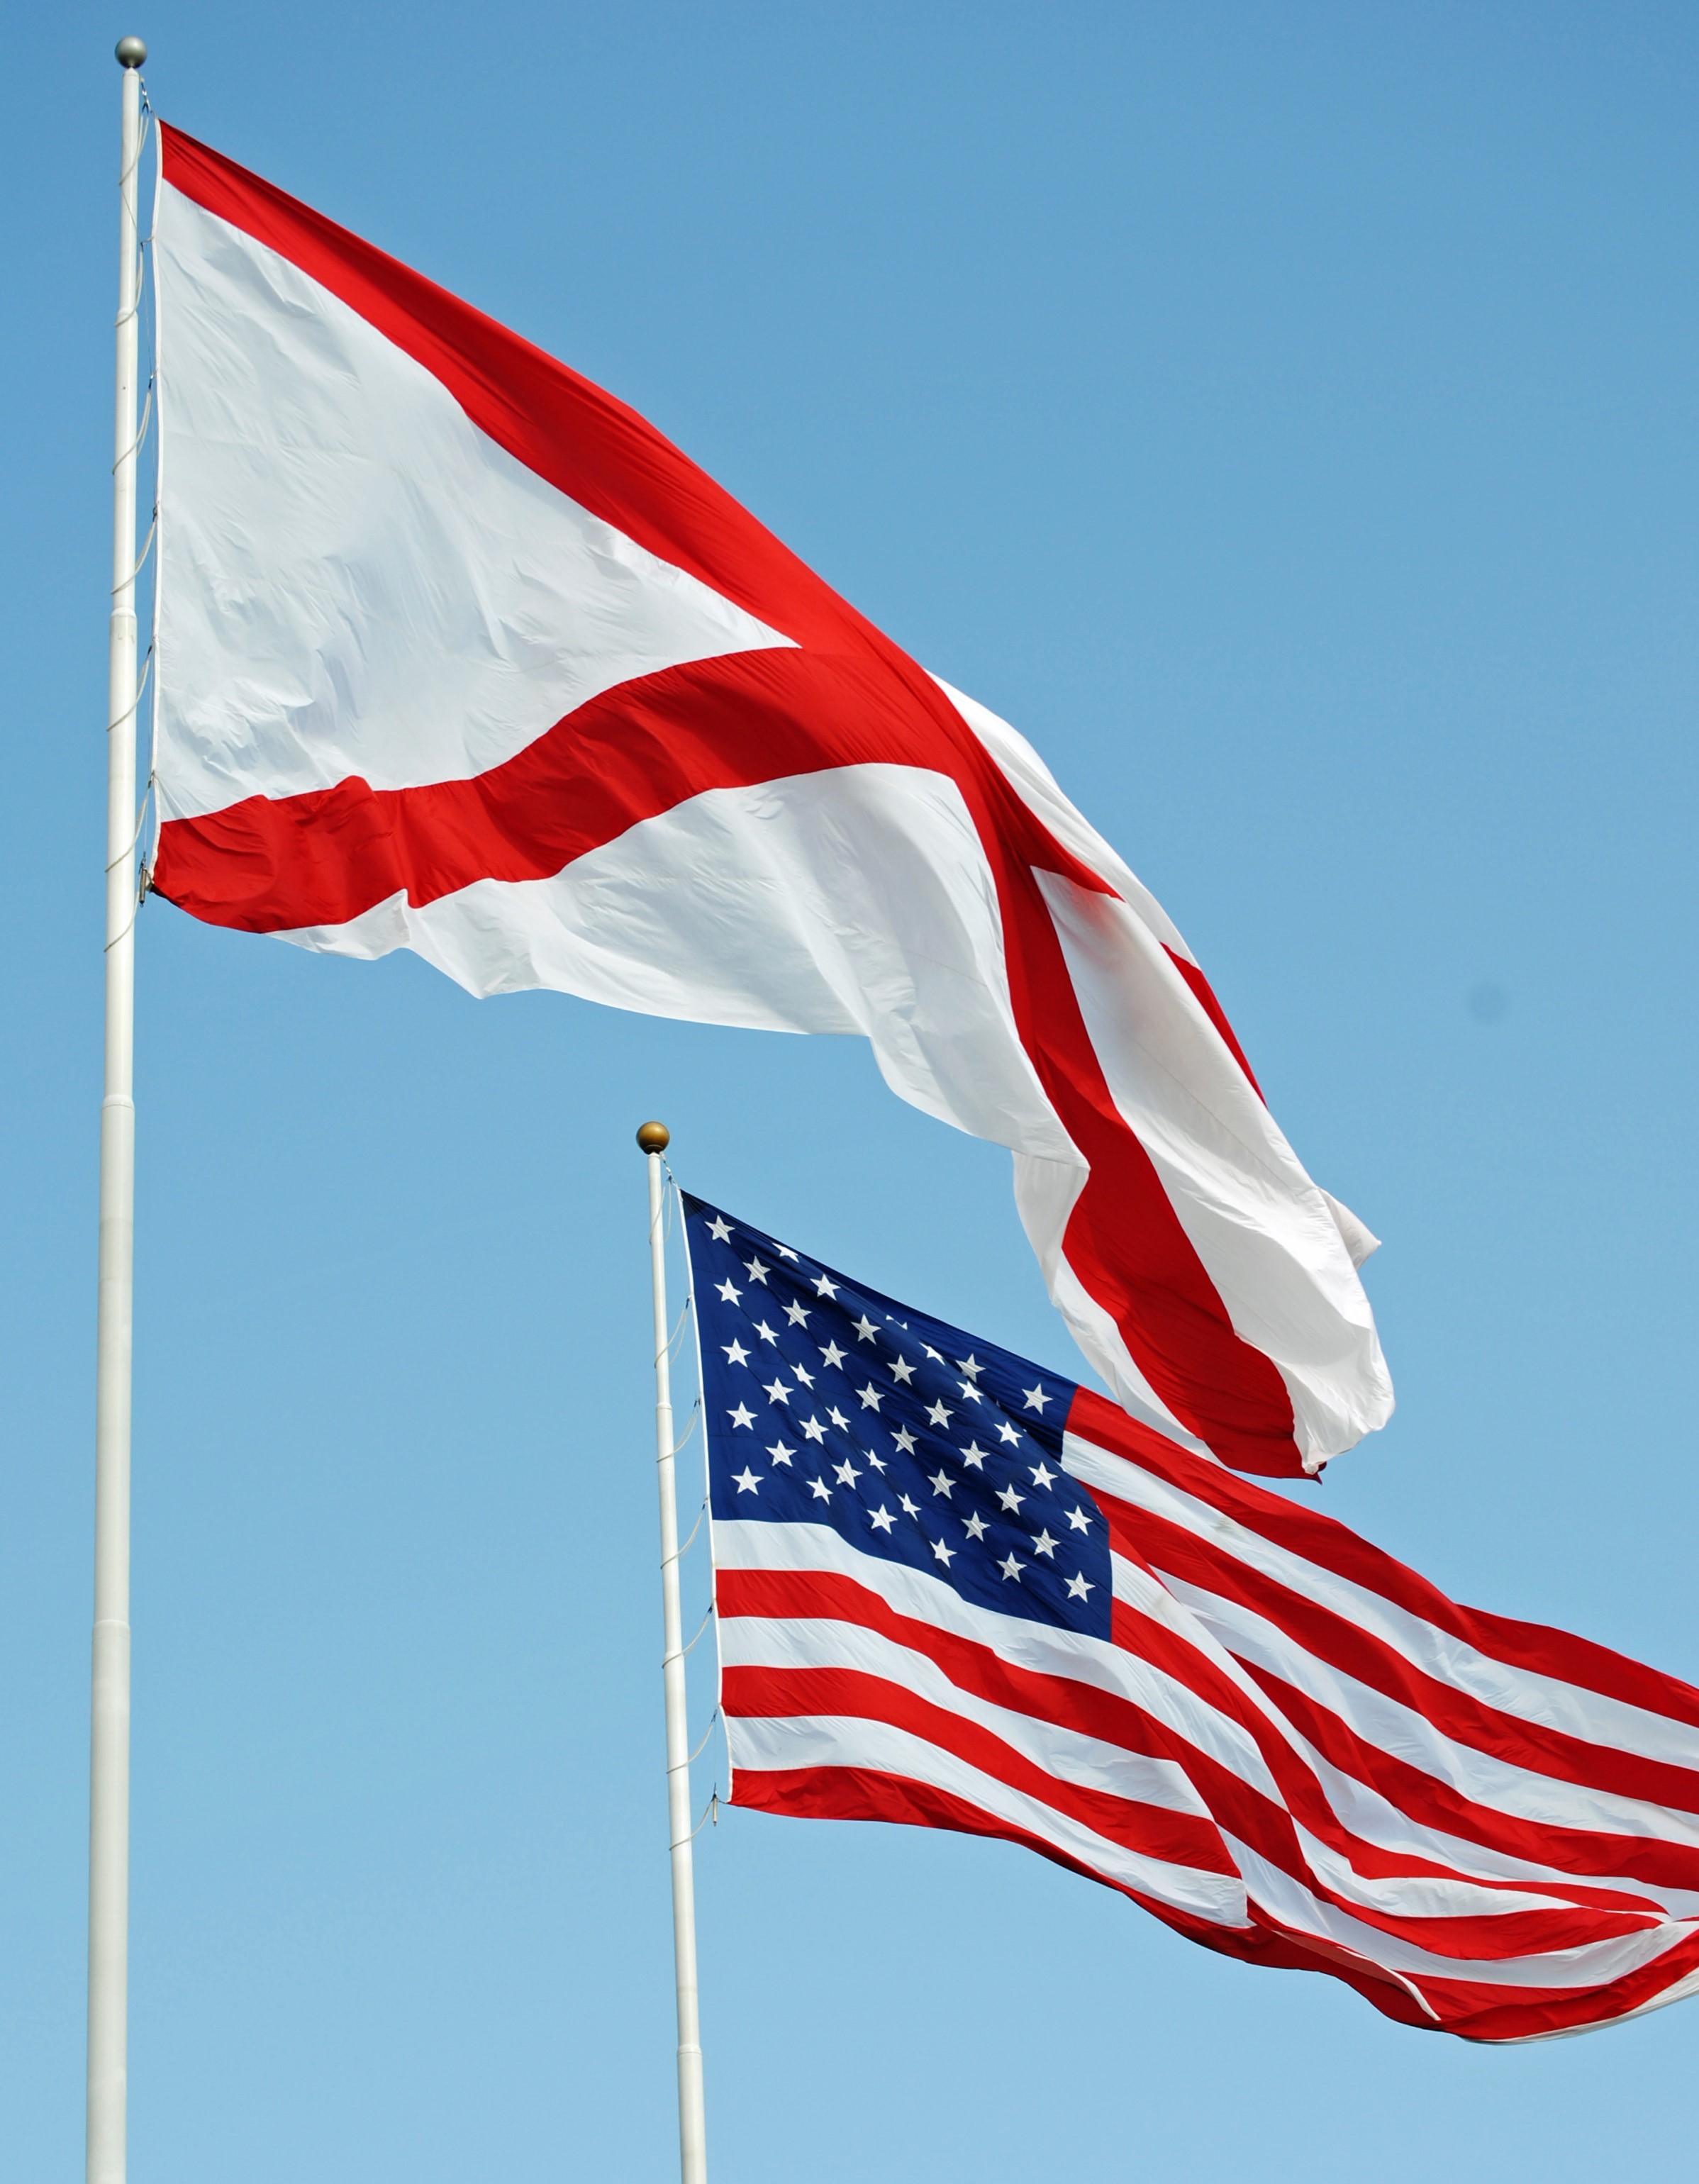 The flags of Alabama and the United States